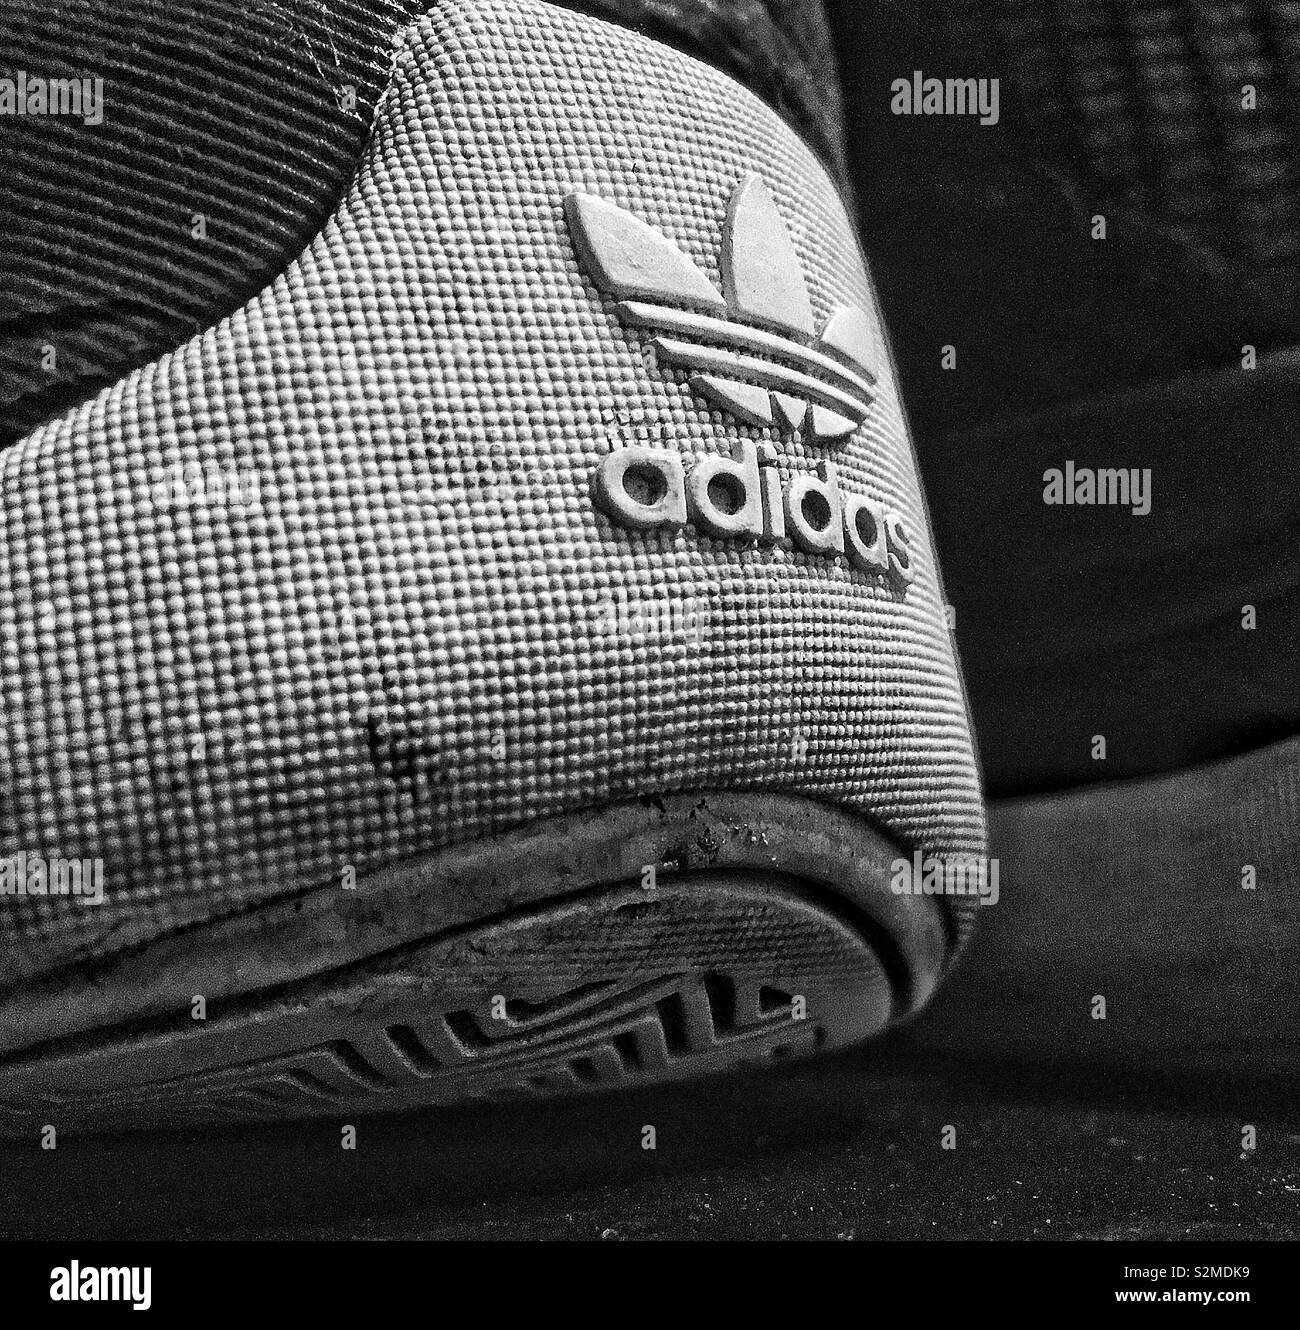 Adidas black and white shoes Black and White Stock Photos & Images - Alamy